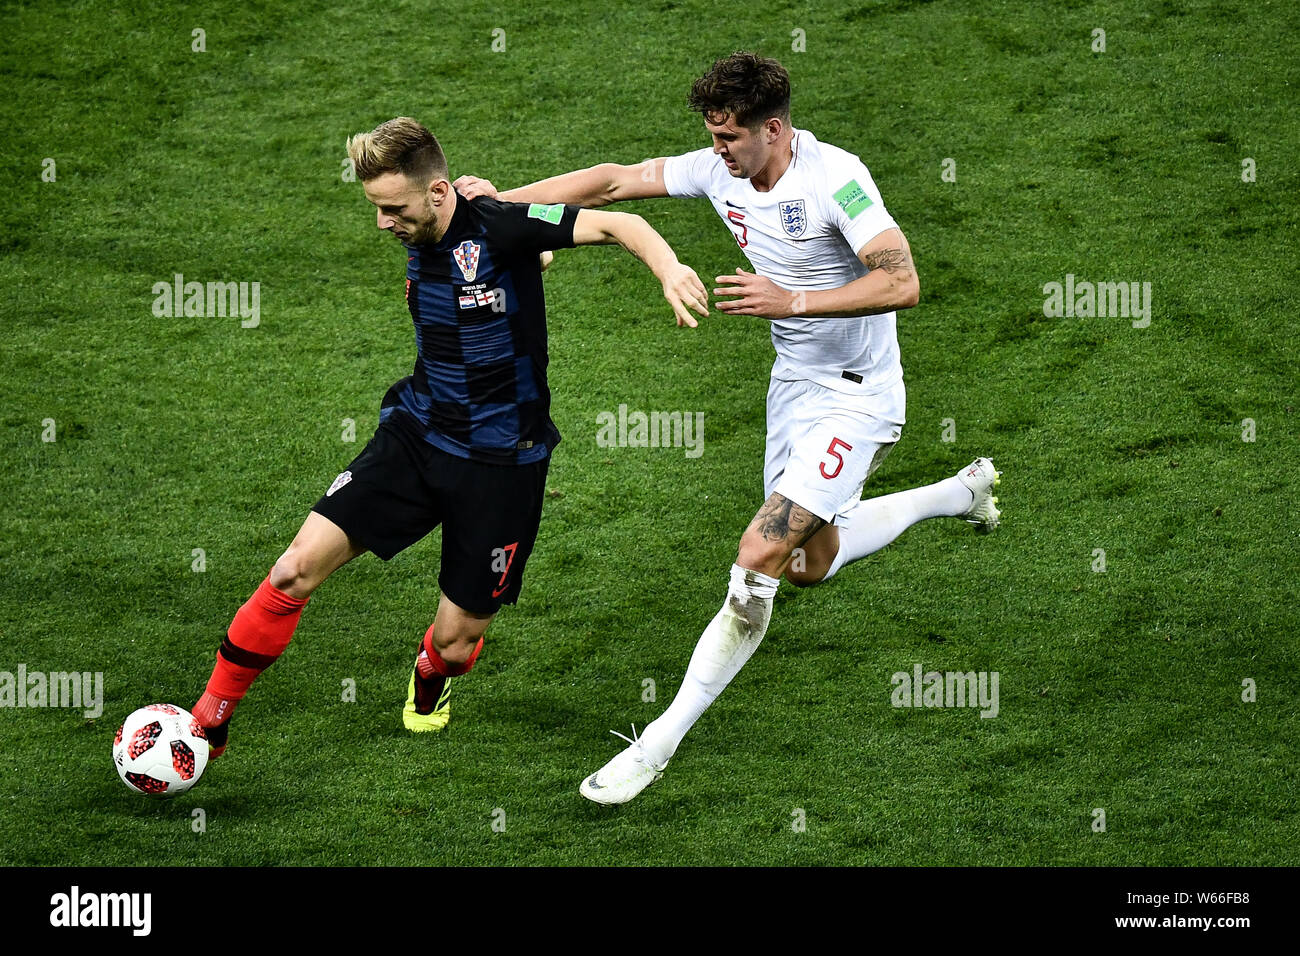 Ivan Rakitic of Croatia, left, challenges John Stones of England in their semifinal match during the 2018 FIFA World Cup in Moscow, Russia, 11 July 20 Stock Photo